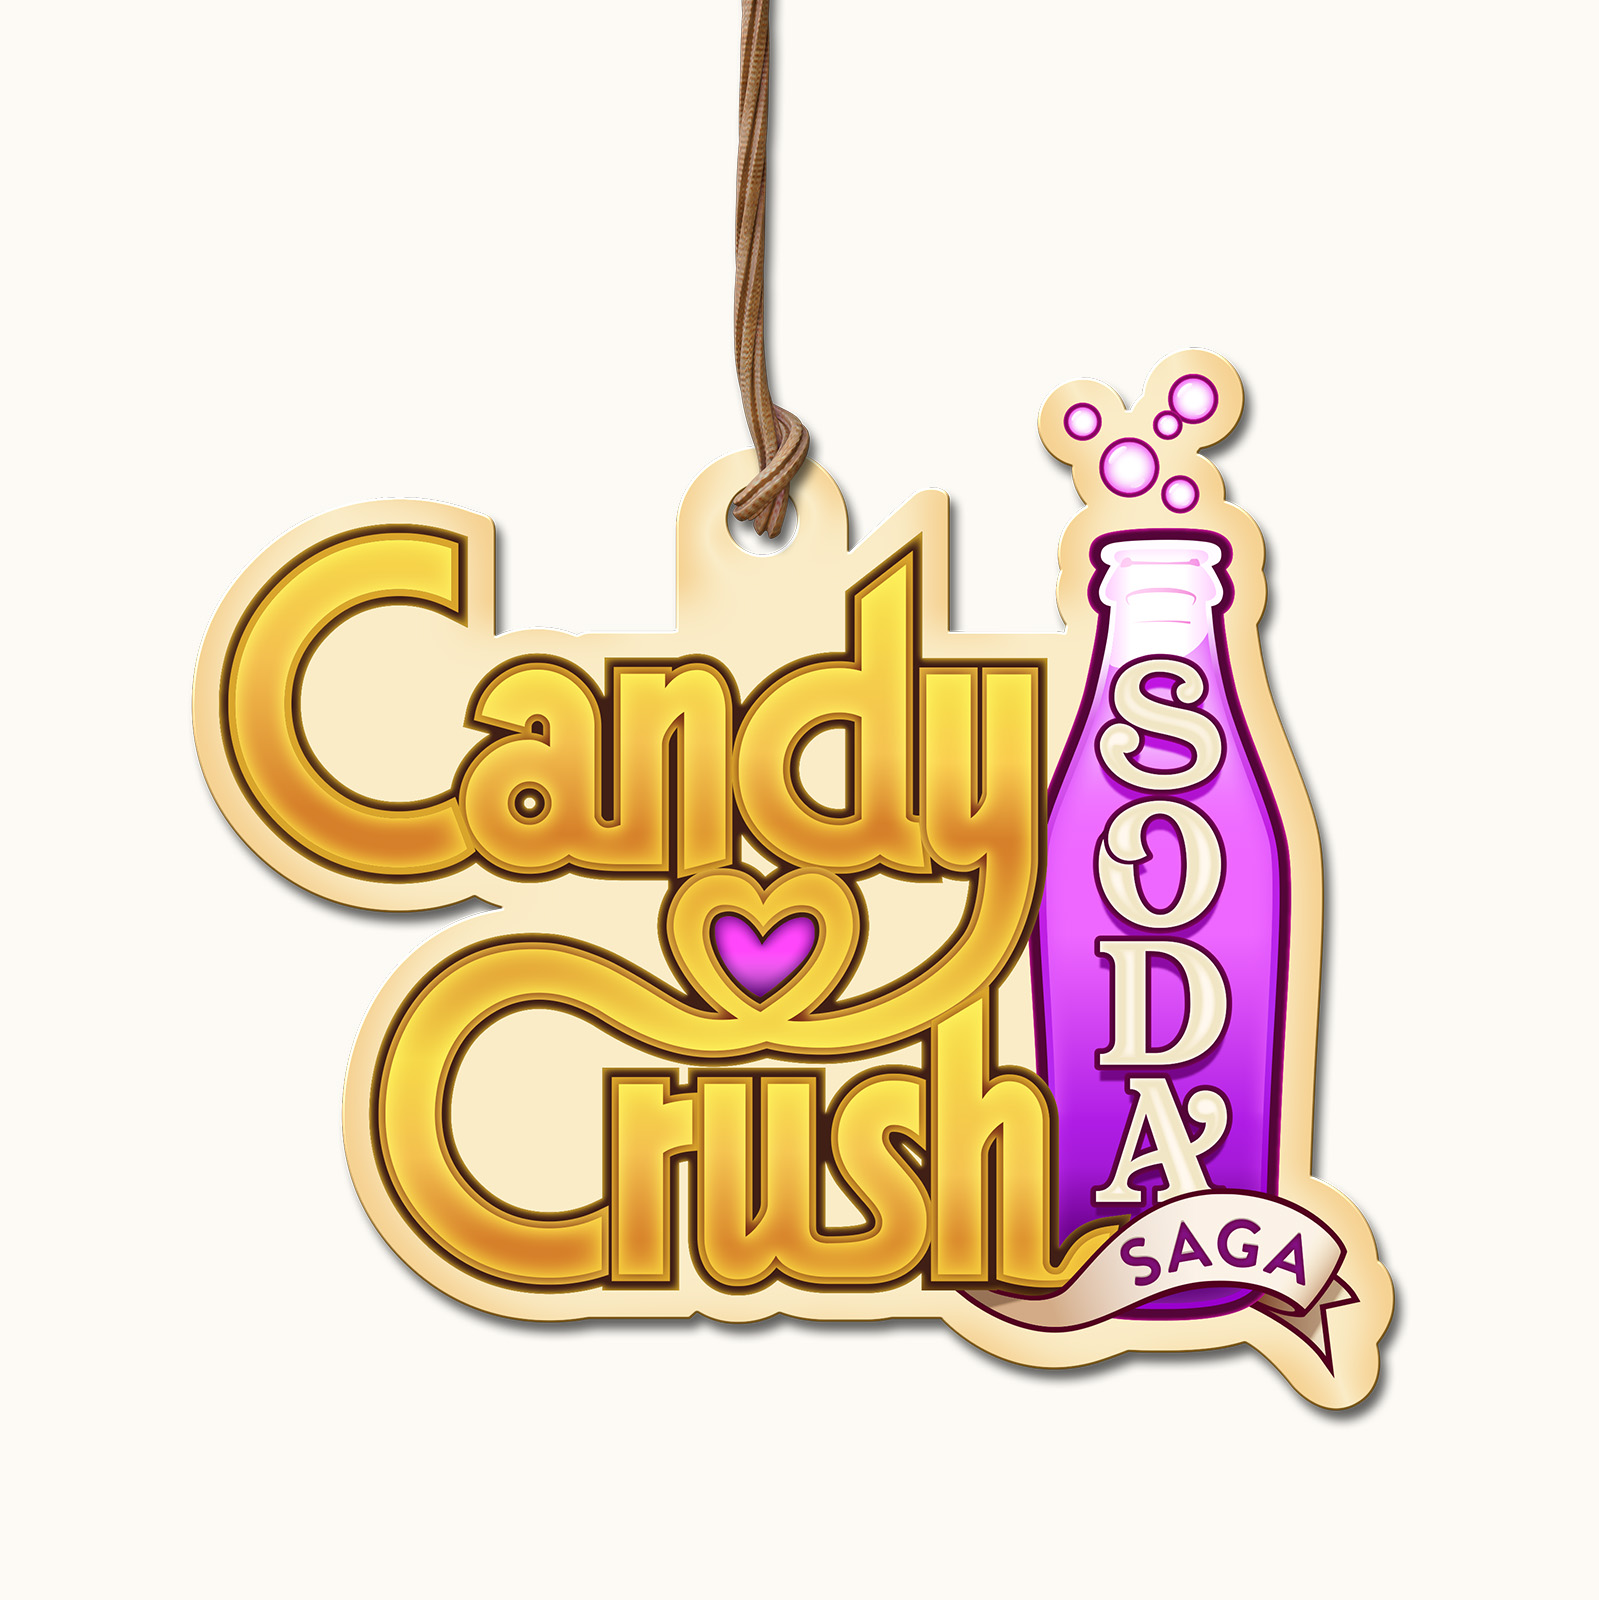 How to Draw the Candy Crush Logo | Drawings, ? logo, Drawing tutorial